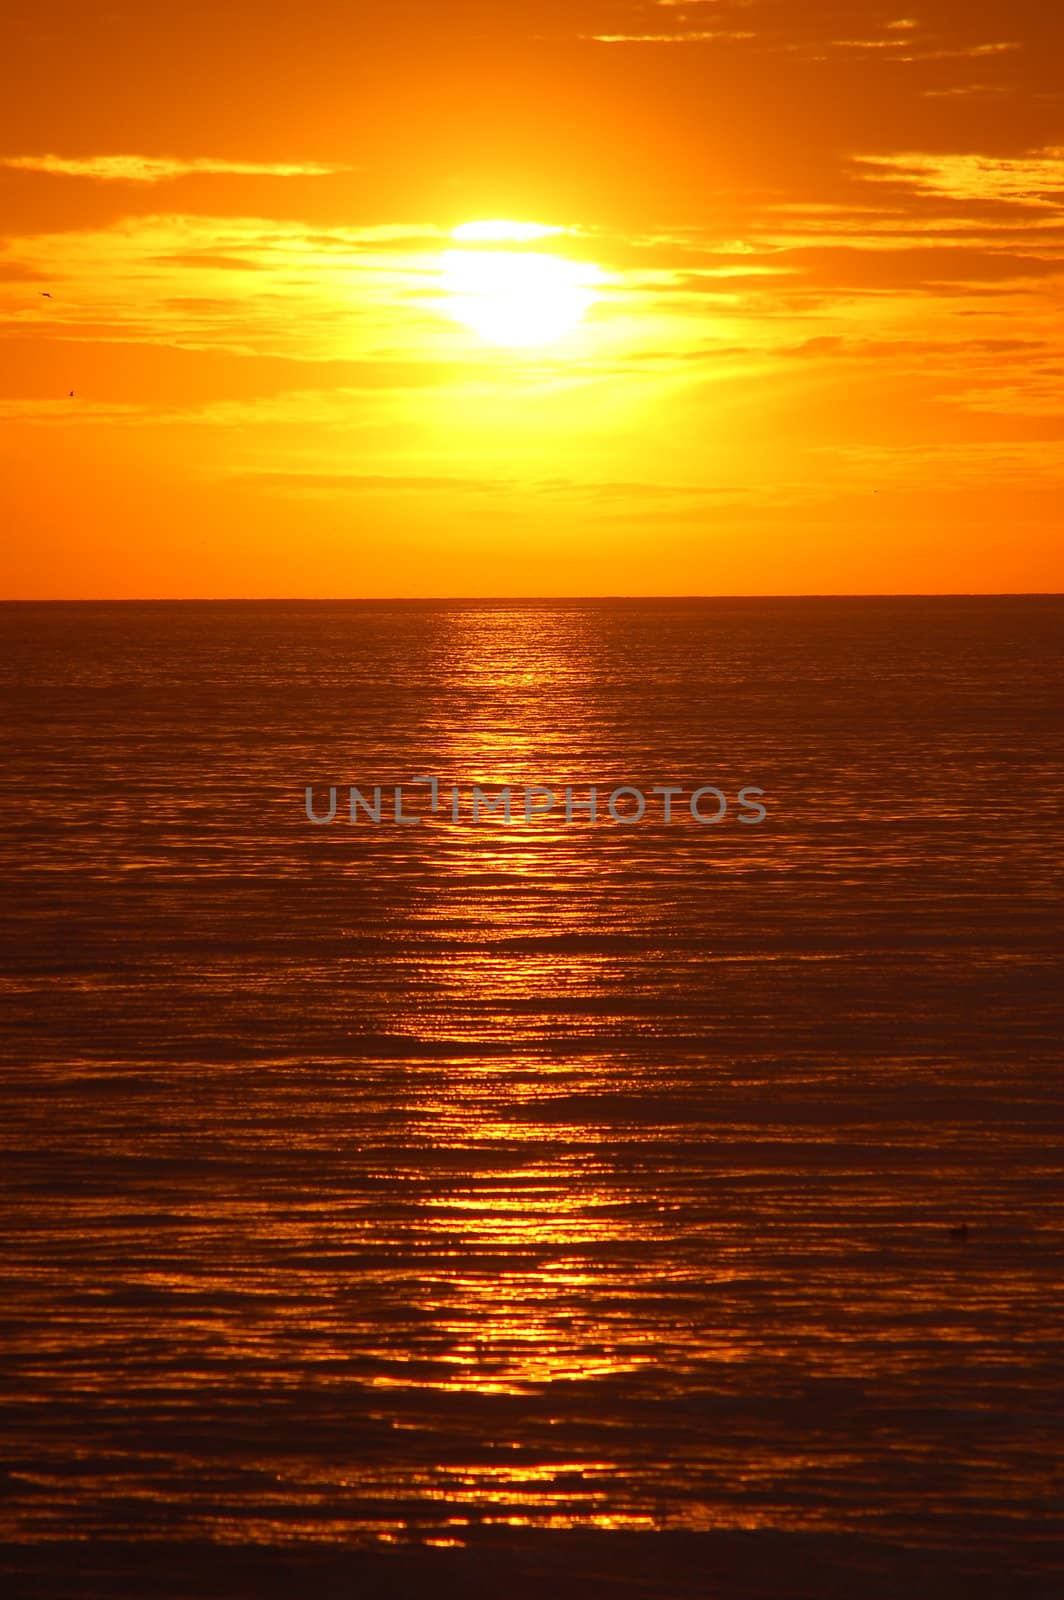 Orange sunset over Pacific Ocean in California, with the major part of the shot showing the reflection of the sun in the ocean